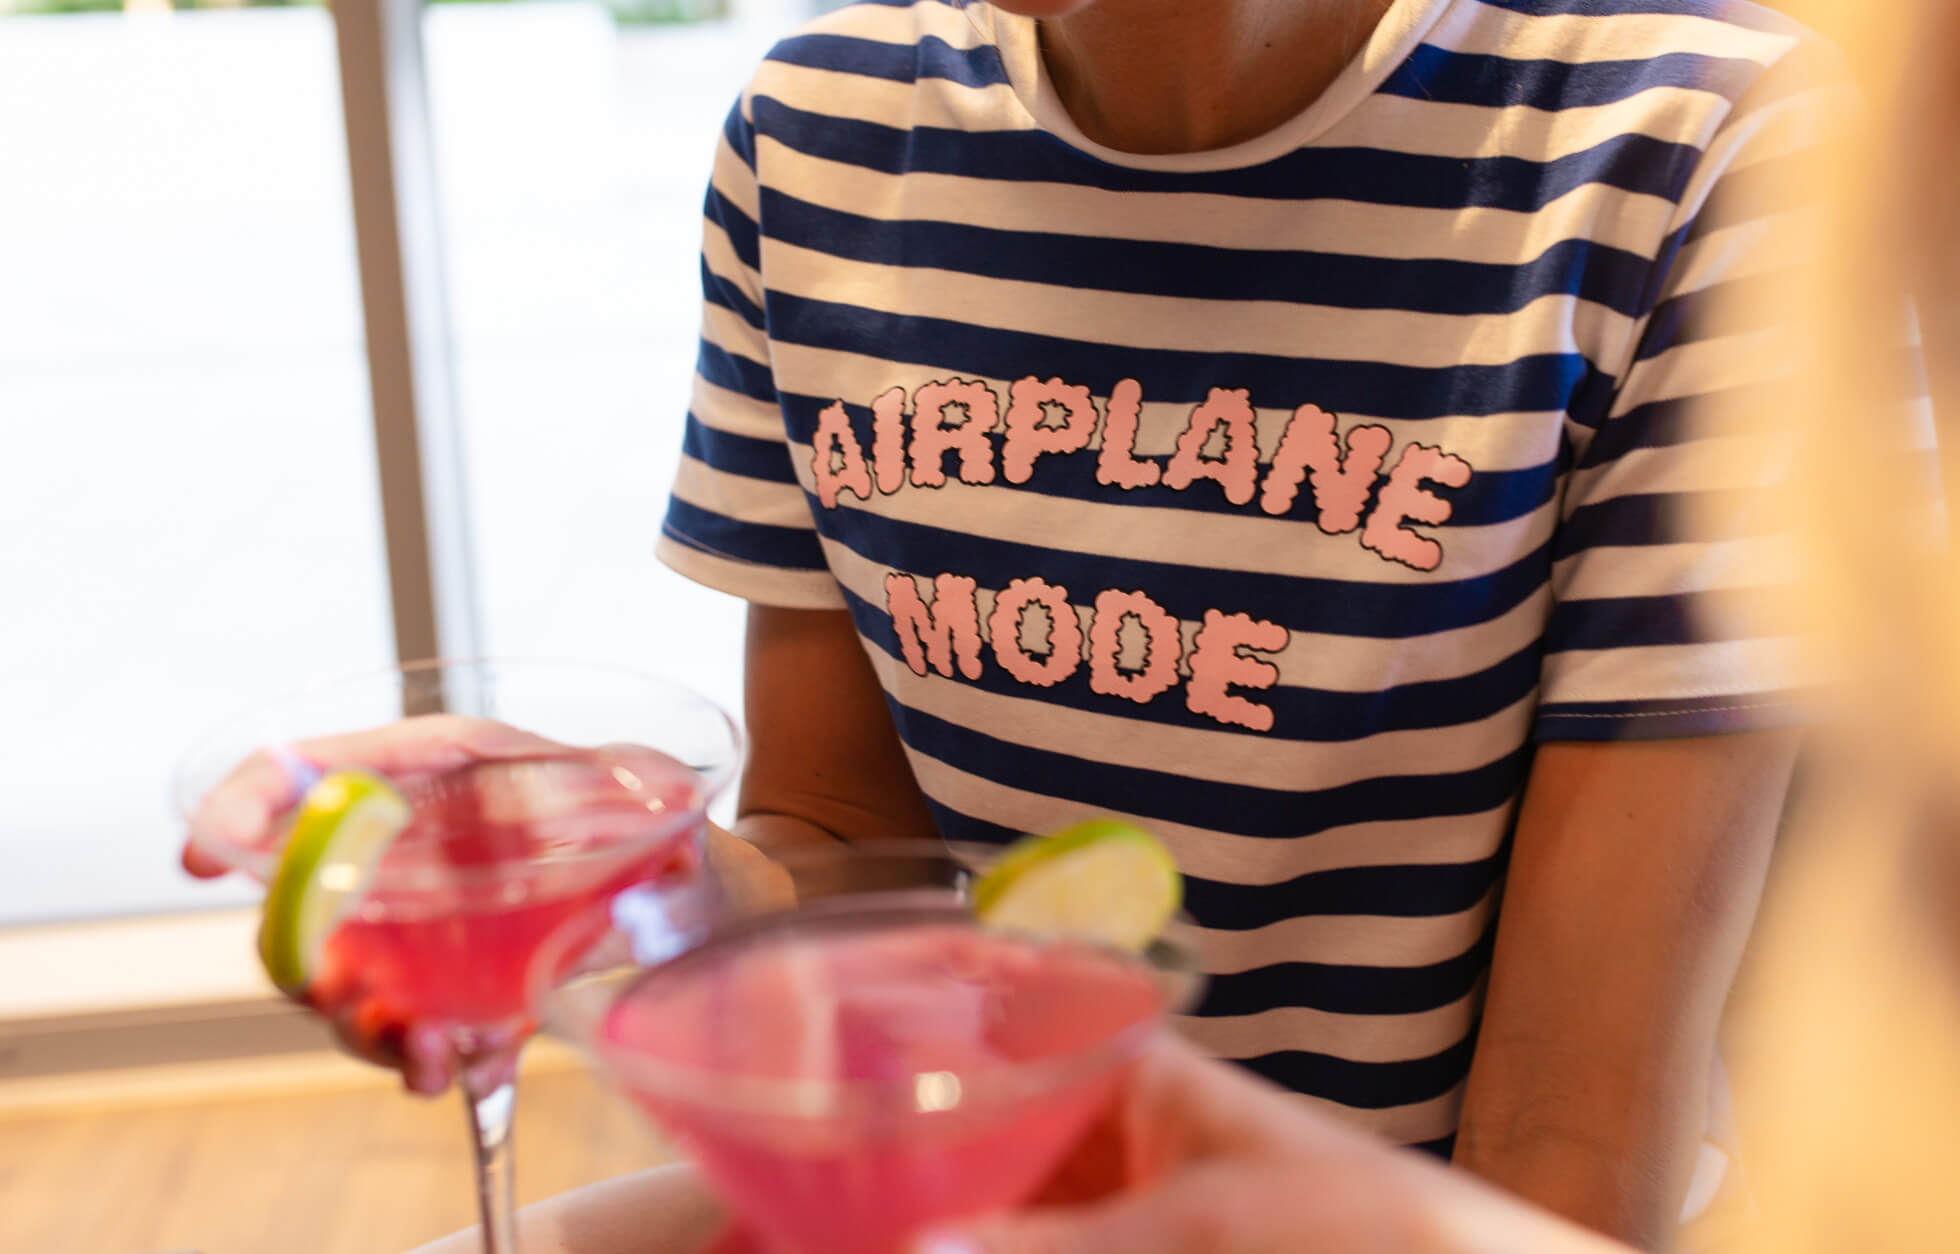 Airplane mode on- The Ultimate Girly Sleepover